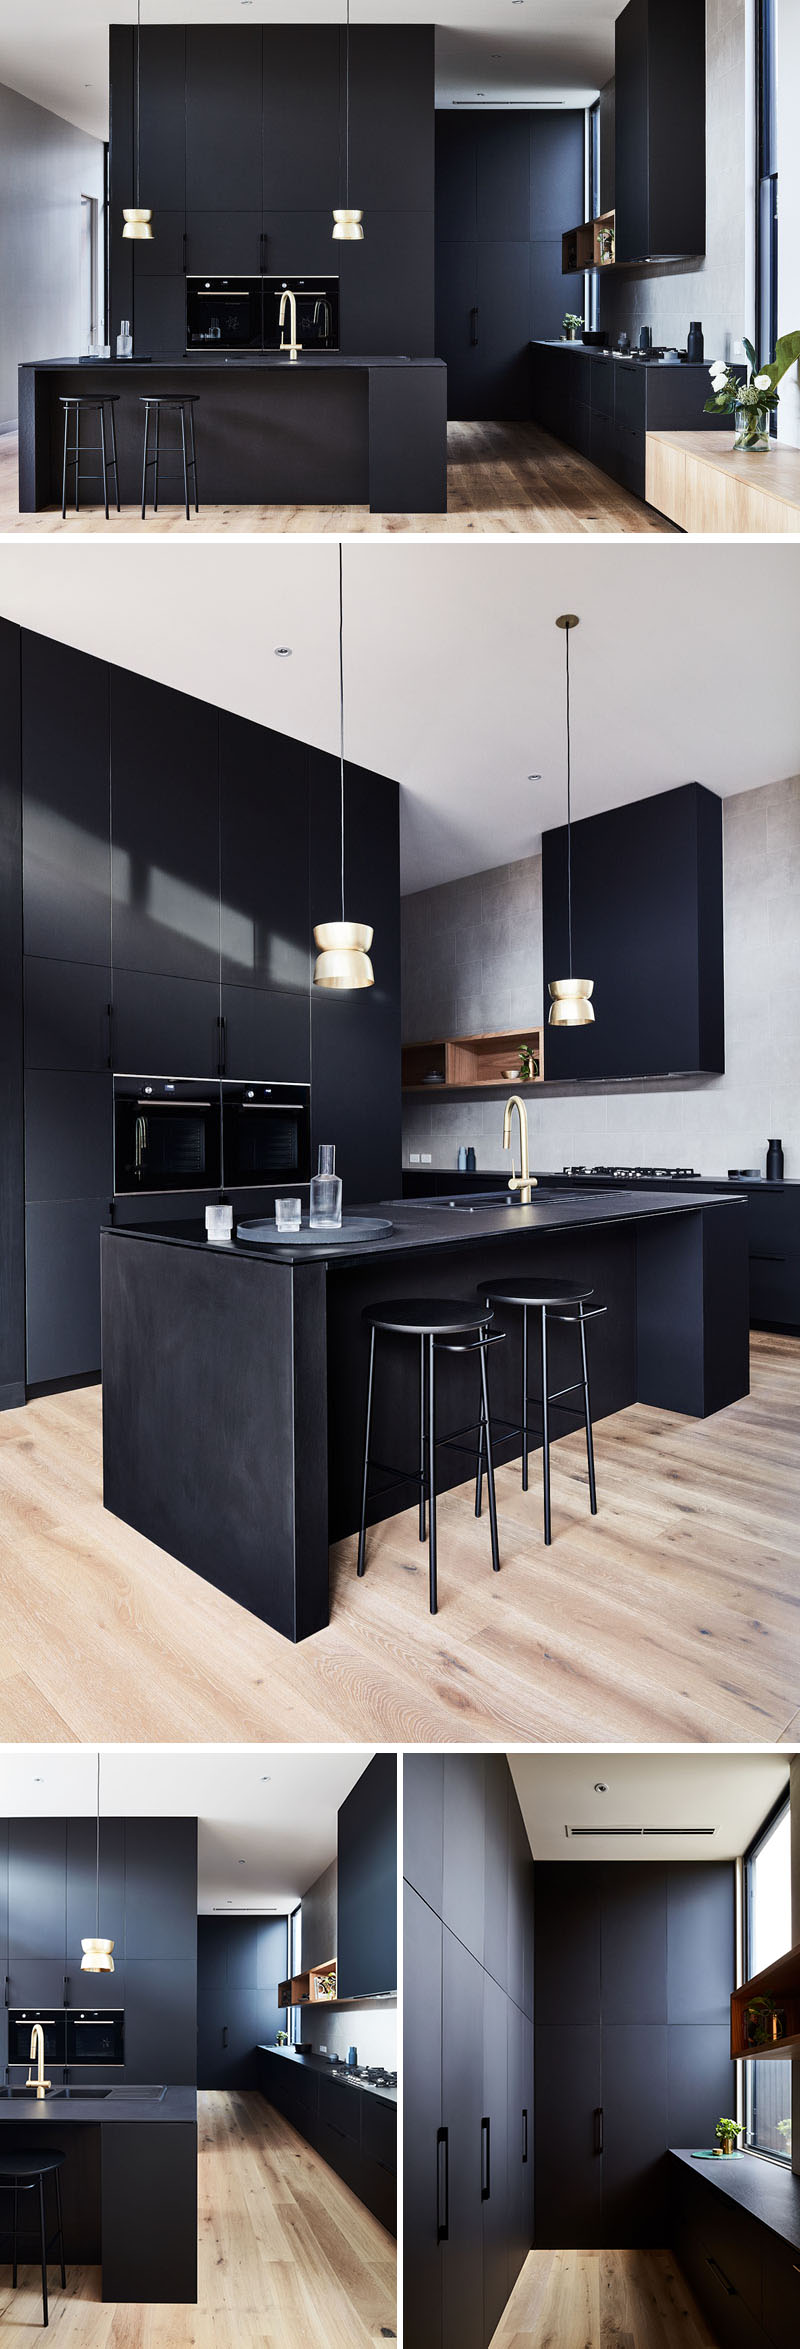 LifeSpaces Group, a building company, have worked together with Auhaus Architecture, to design and build a new house with a black kitchen.